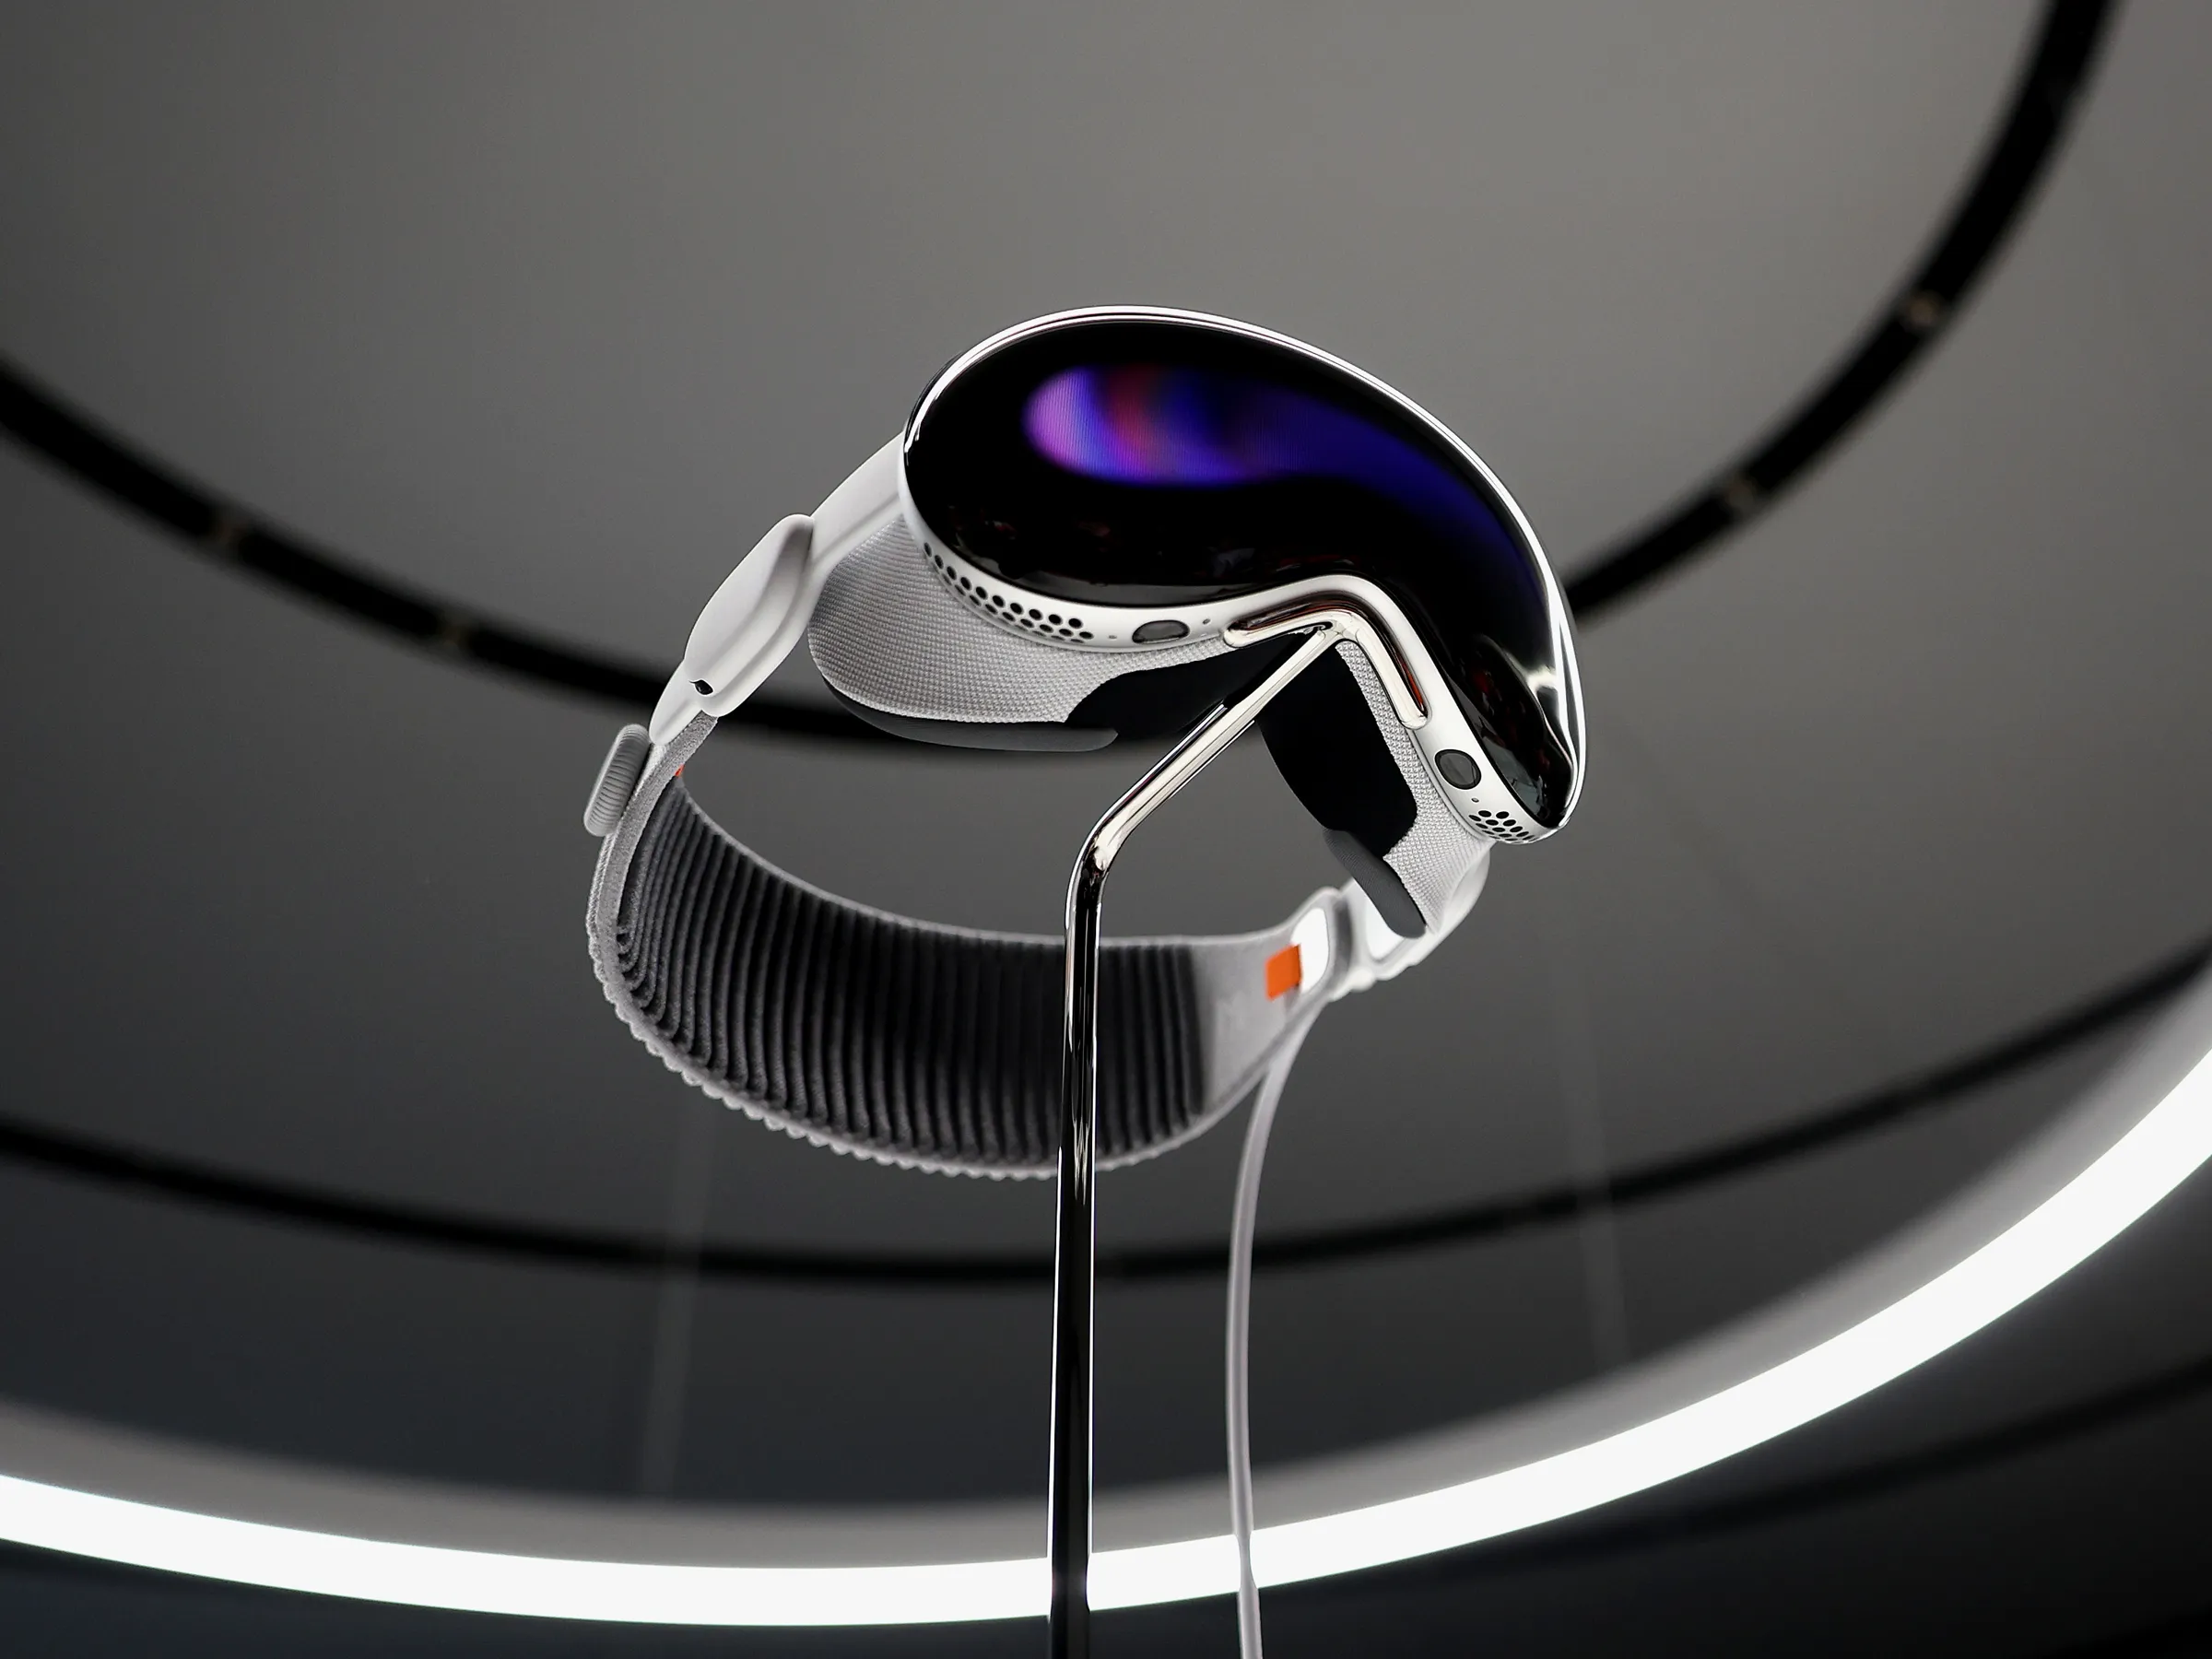 The Apple Vision Pro is a mixed reality headset that was announced in June 2023. It features a number of cutting-edge technologies, including: 